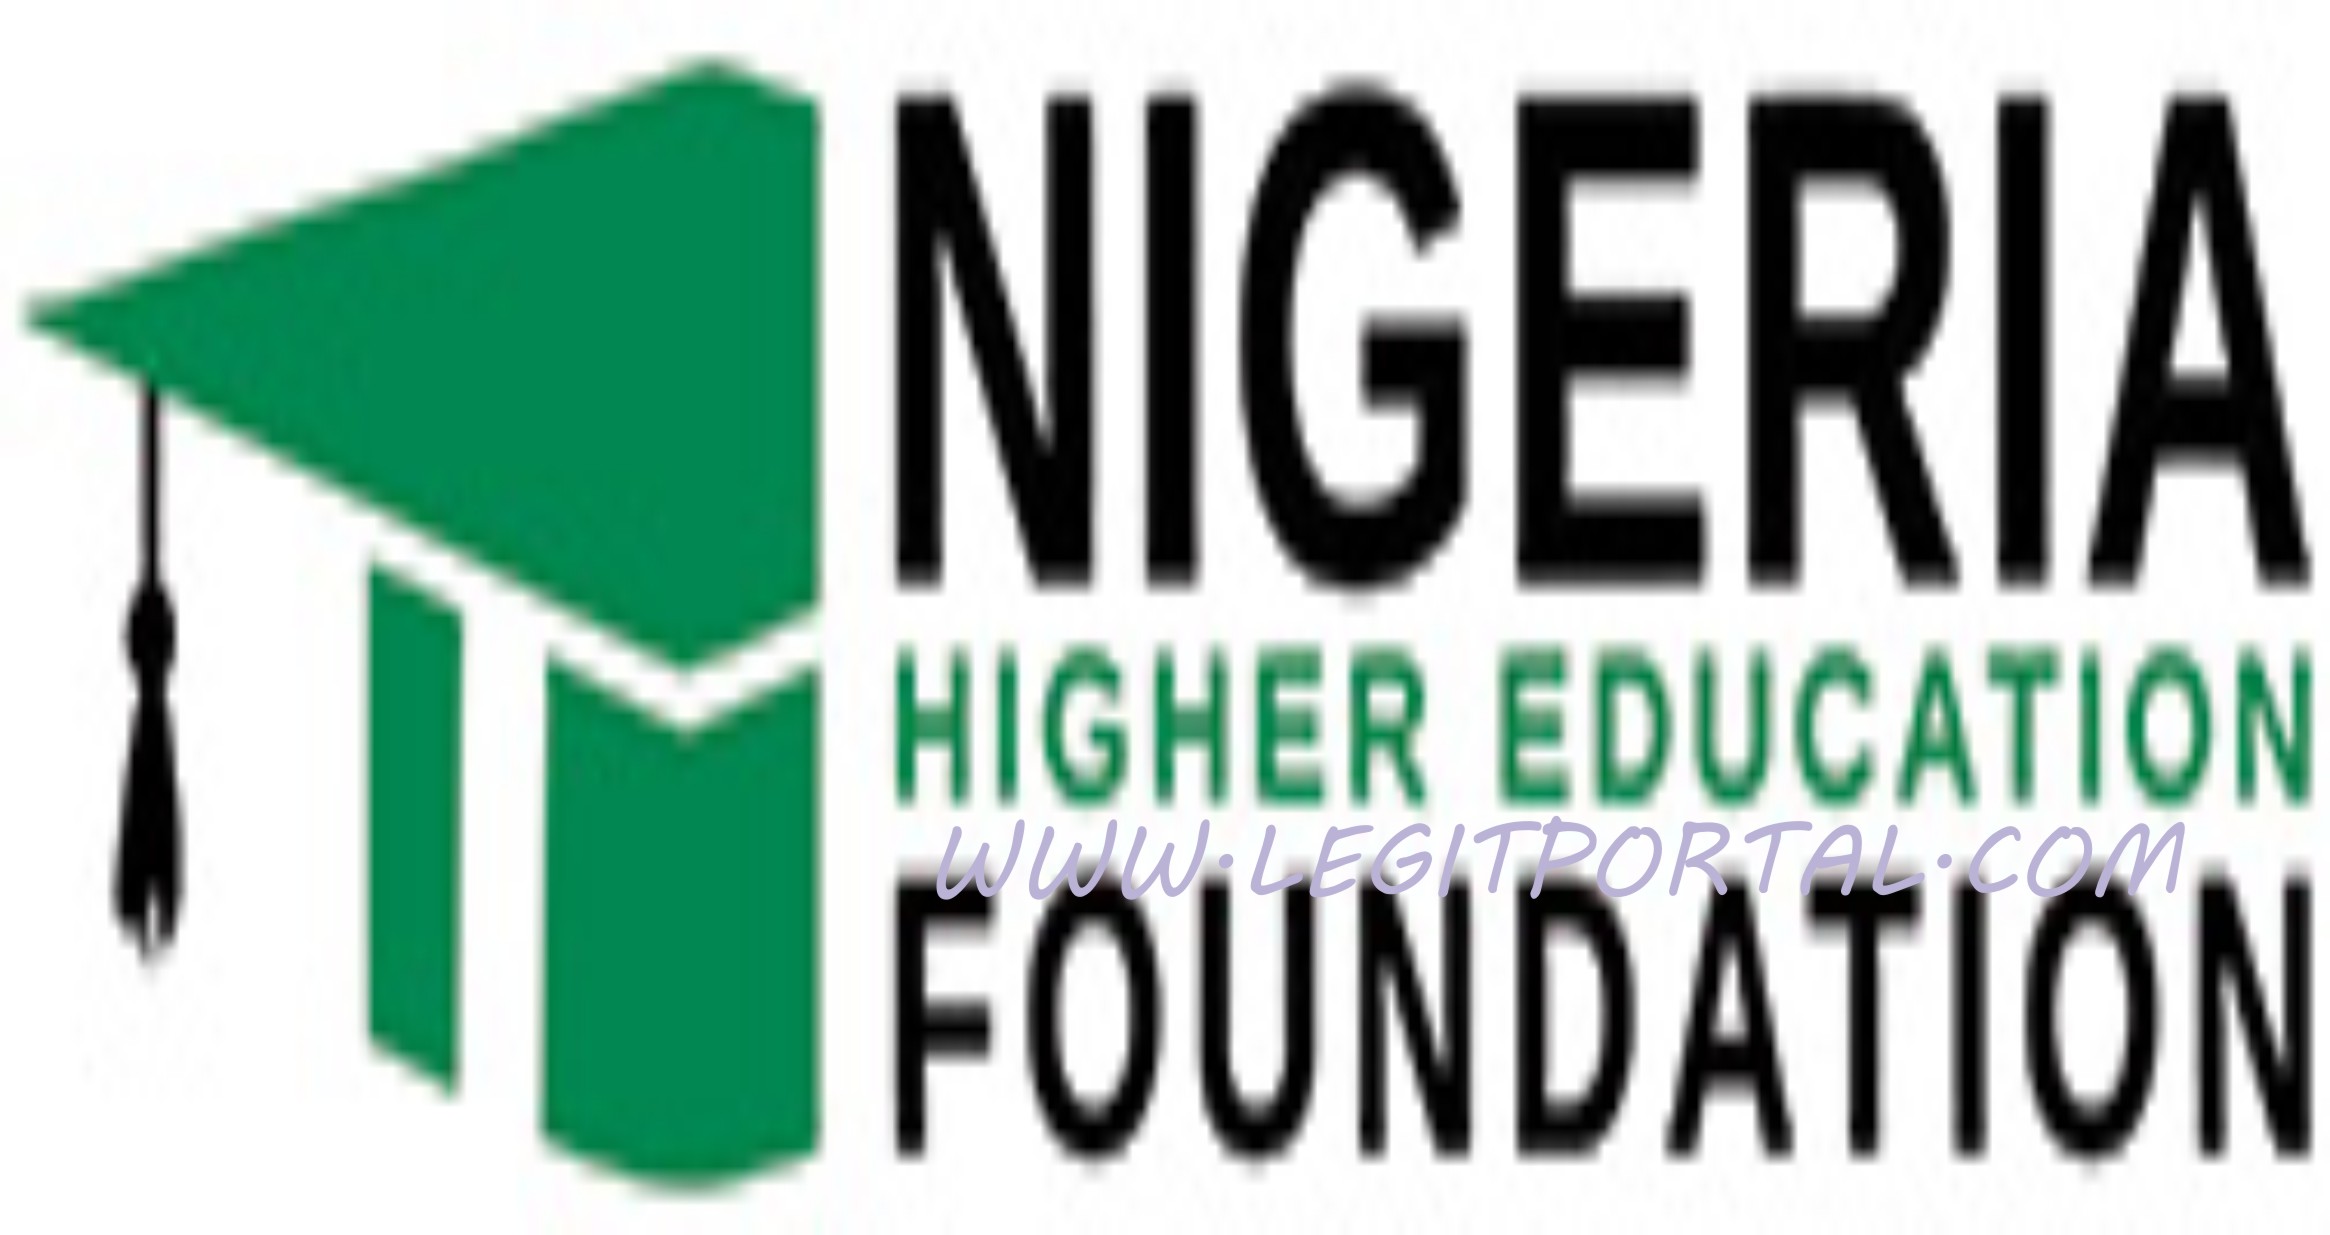 How to Apply for Nigeria Higher Education Foundation (NHEF) Scholars Program 2019 and Closing Date